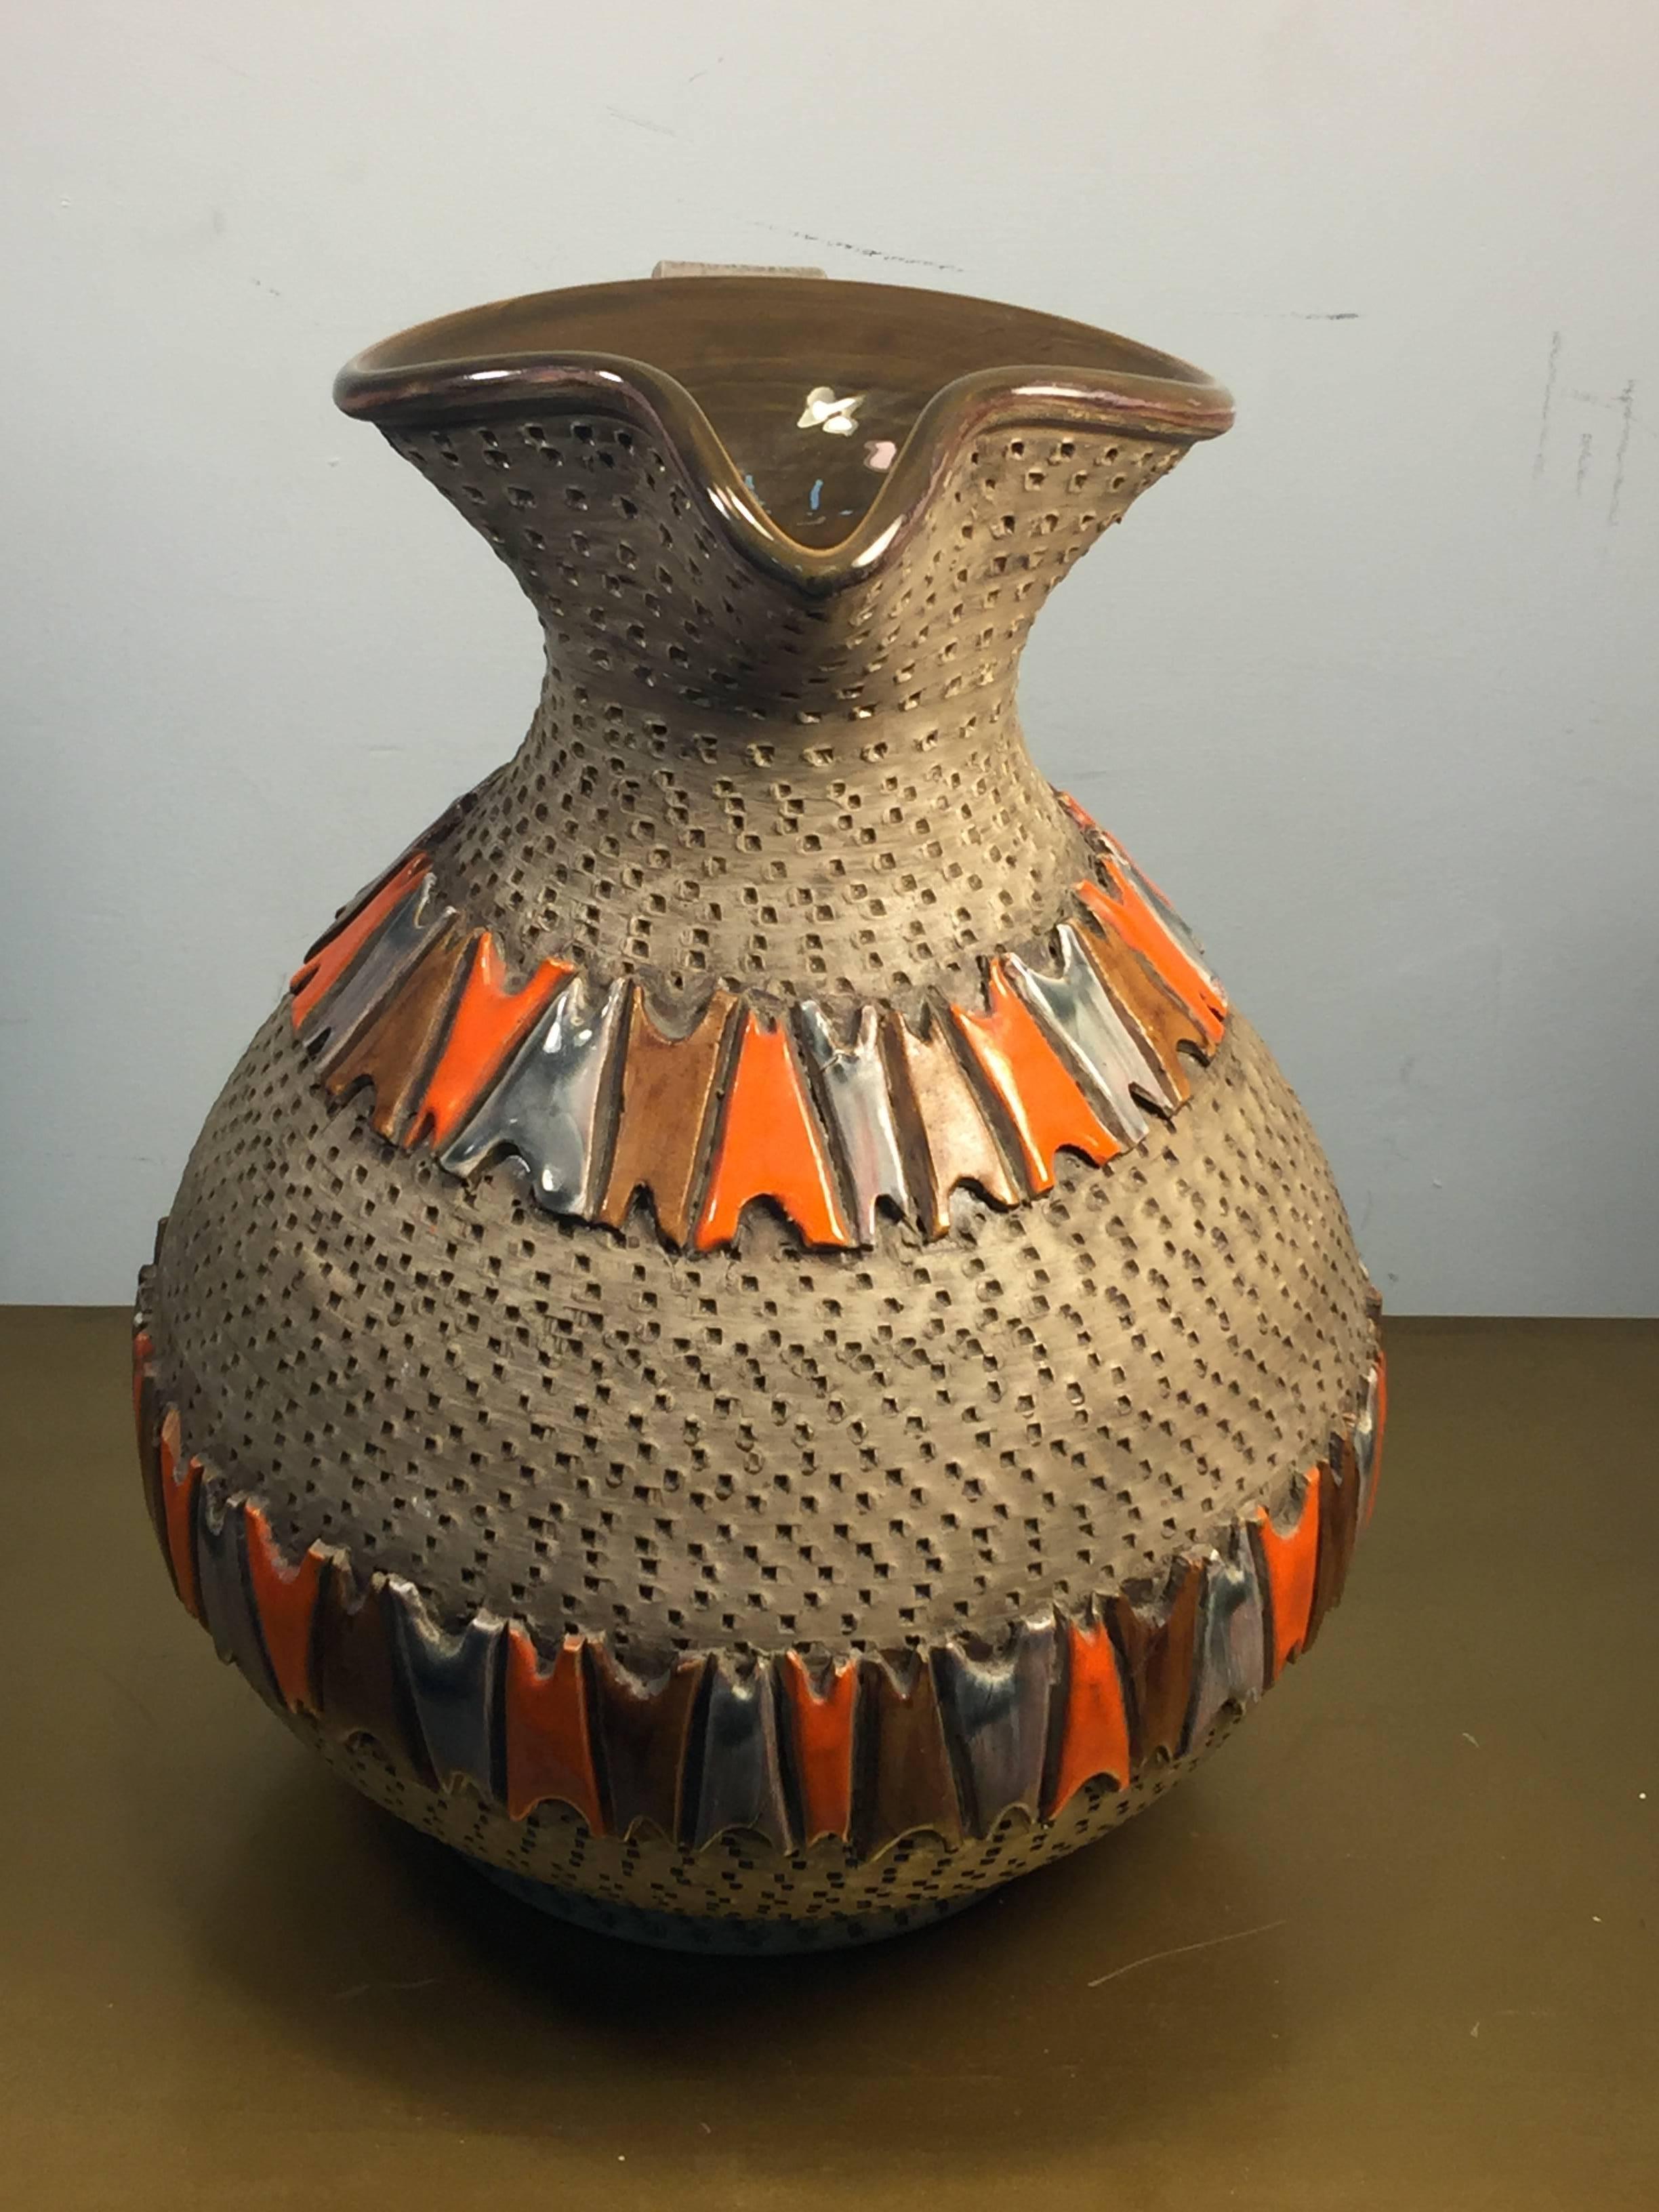 Italian pottery pitcher formed in the Brutalist manner with brown rough textured background and geometric glazed designs in deep brown, orange and gray. Created in Italy, circa 1950s-1960s, the base measures at 6 1/2